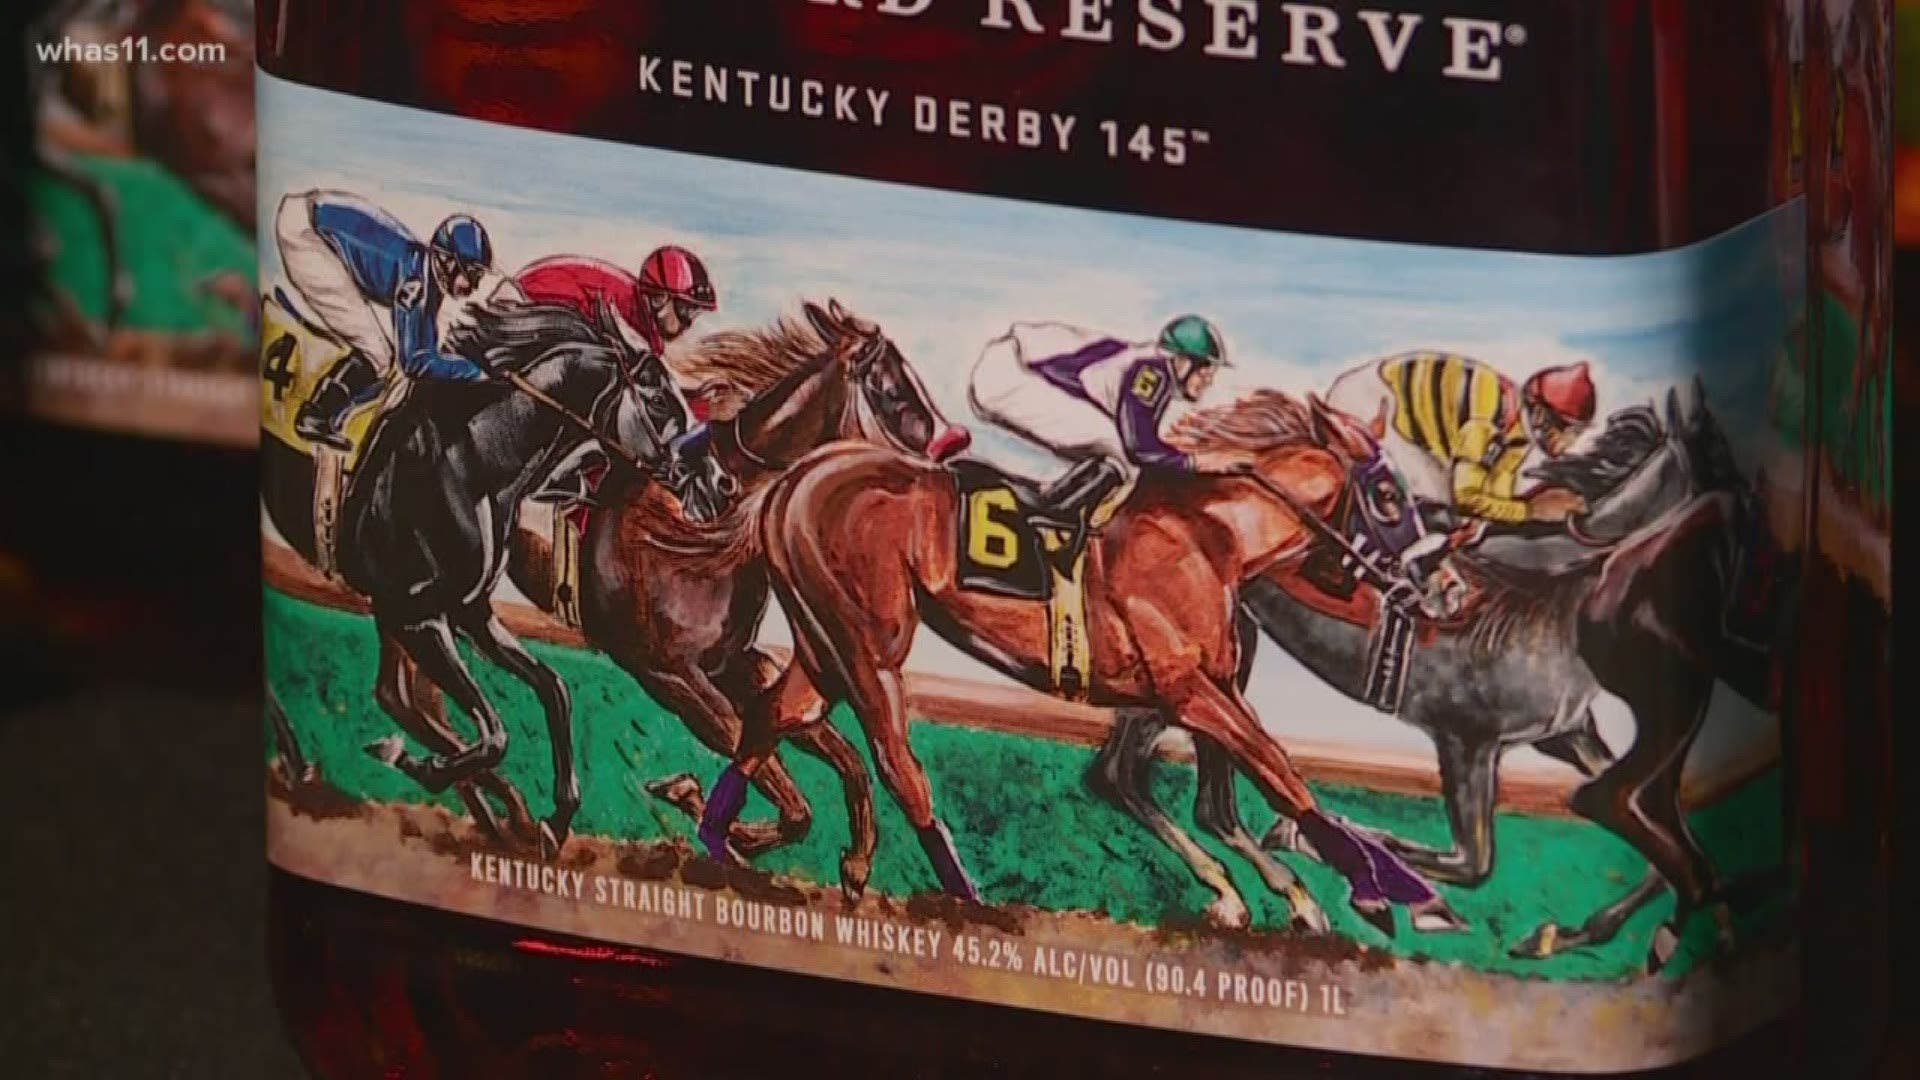 For the past 20 years, Woodford Reserve has celebrated the Greatest Two Minutes in Sports with a special Derby bottle.